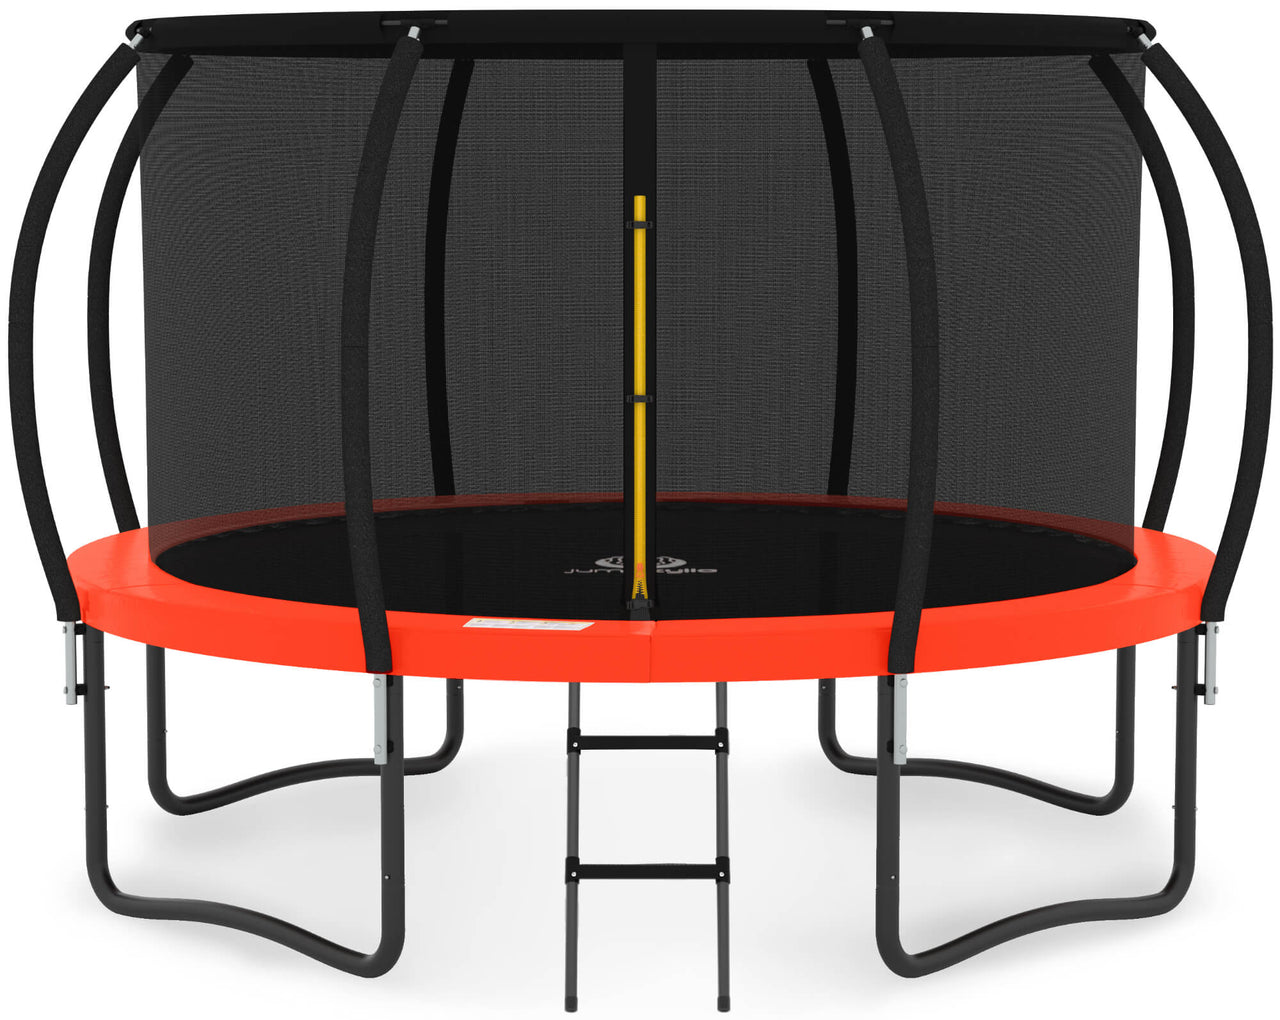 Jumpzylla 12FT Trampoline with Enclosure & Double Color Pad Cover